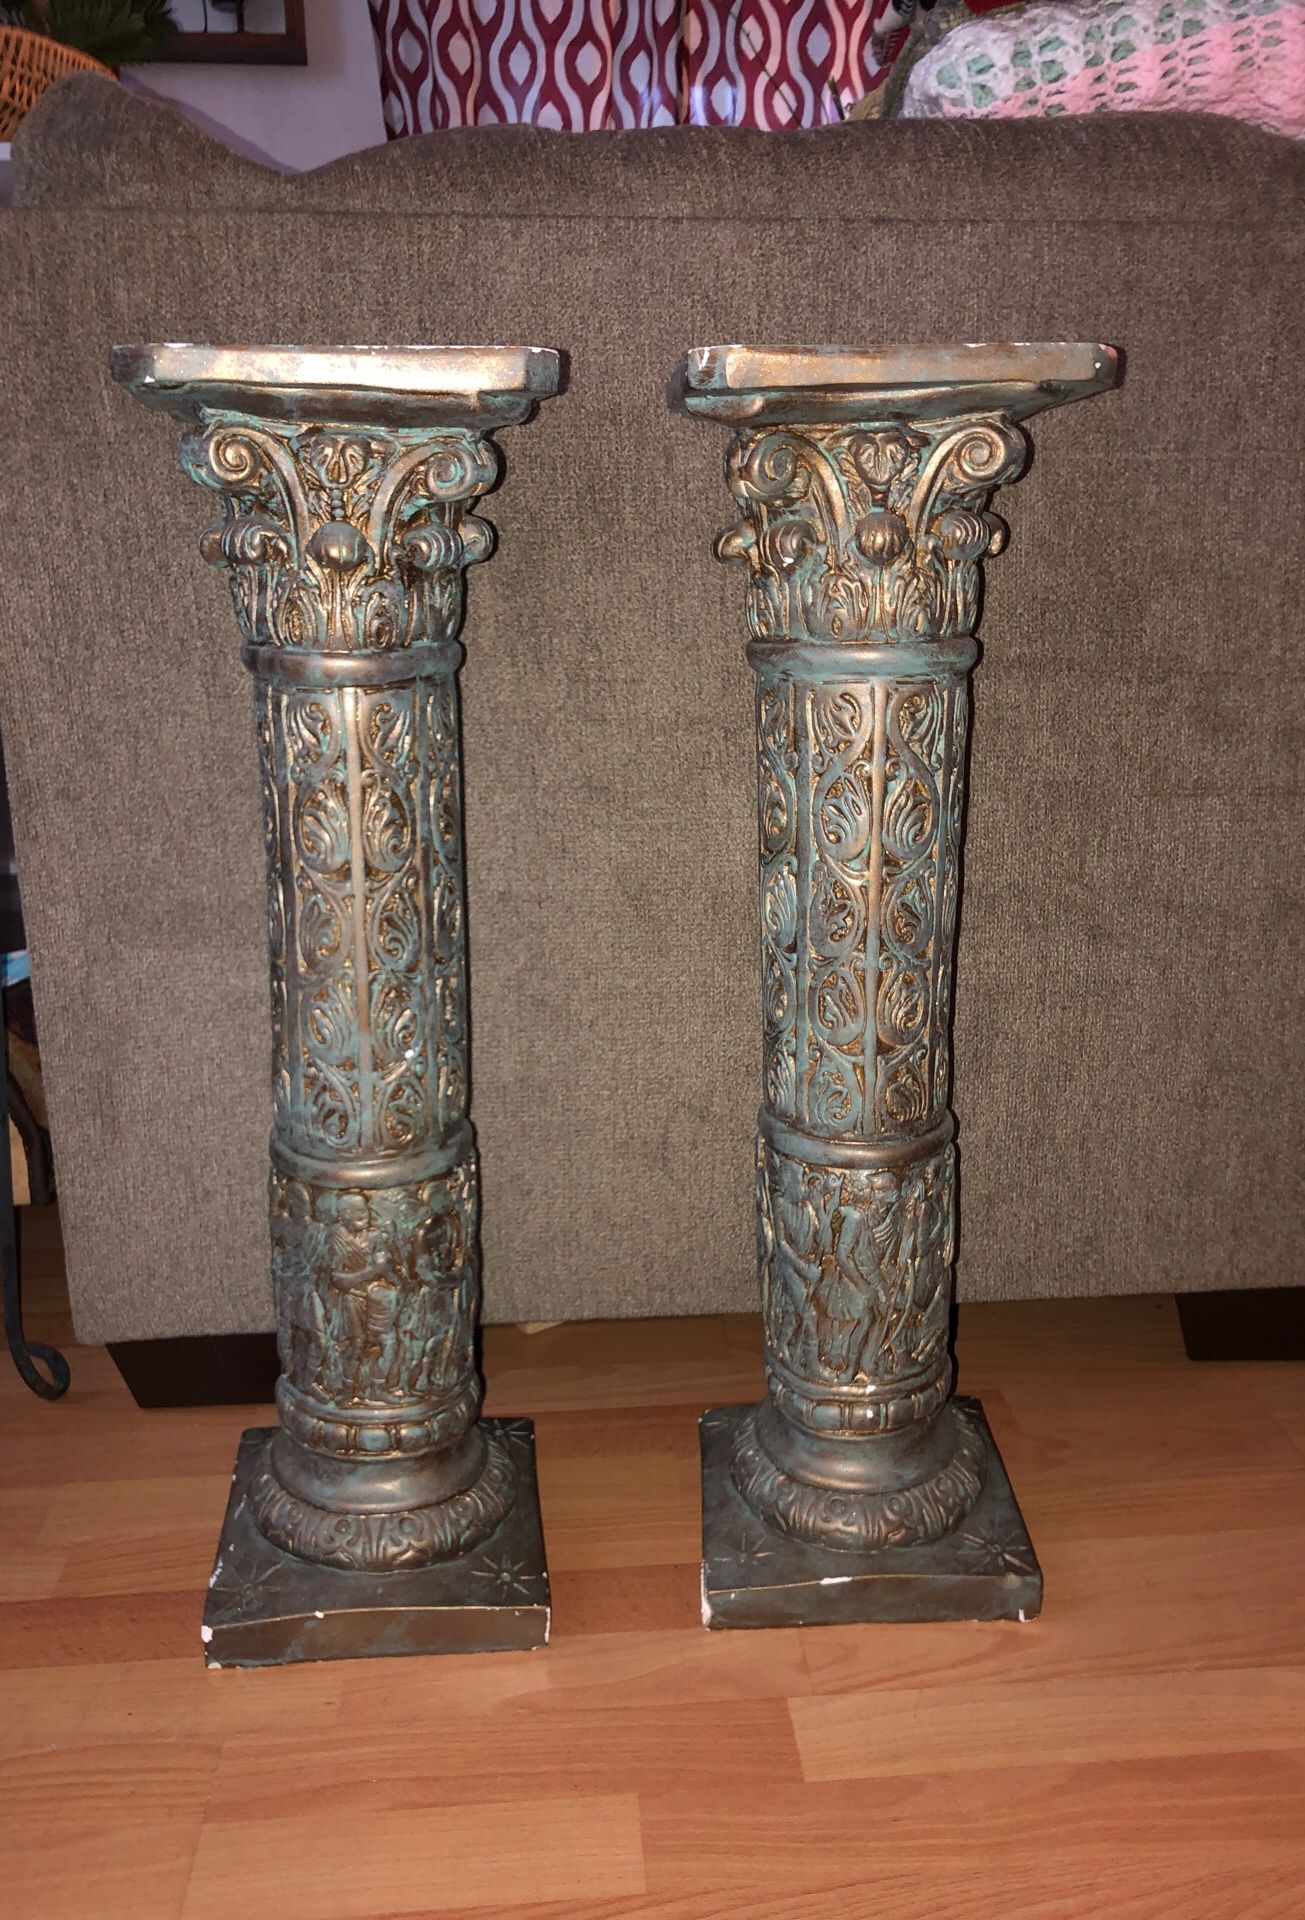 Painted Patina (looking) Pedestals/ pillars/ plant stand 29 inches tall 8inch x 8inch top